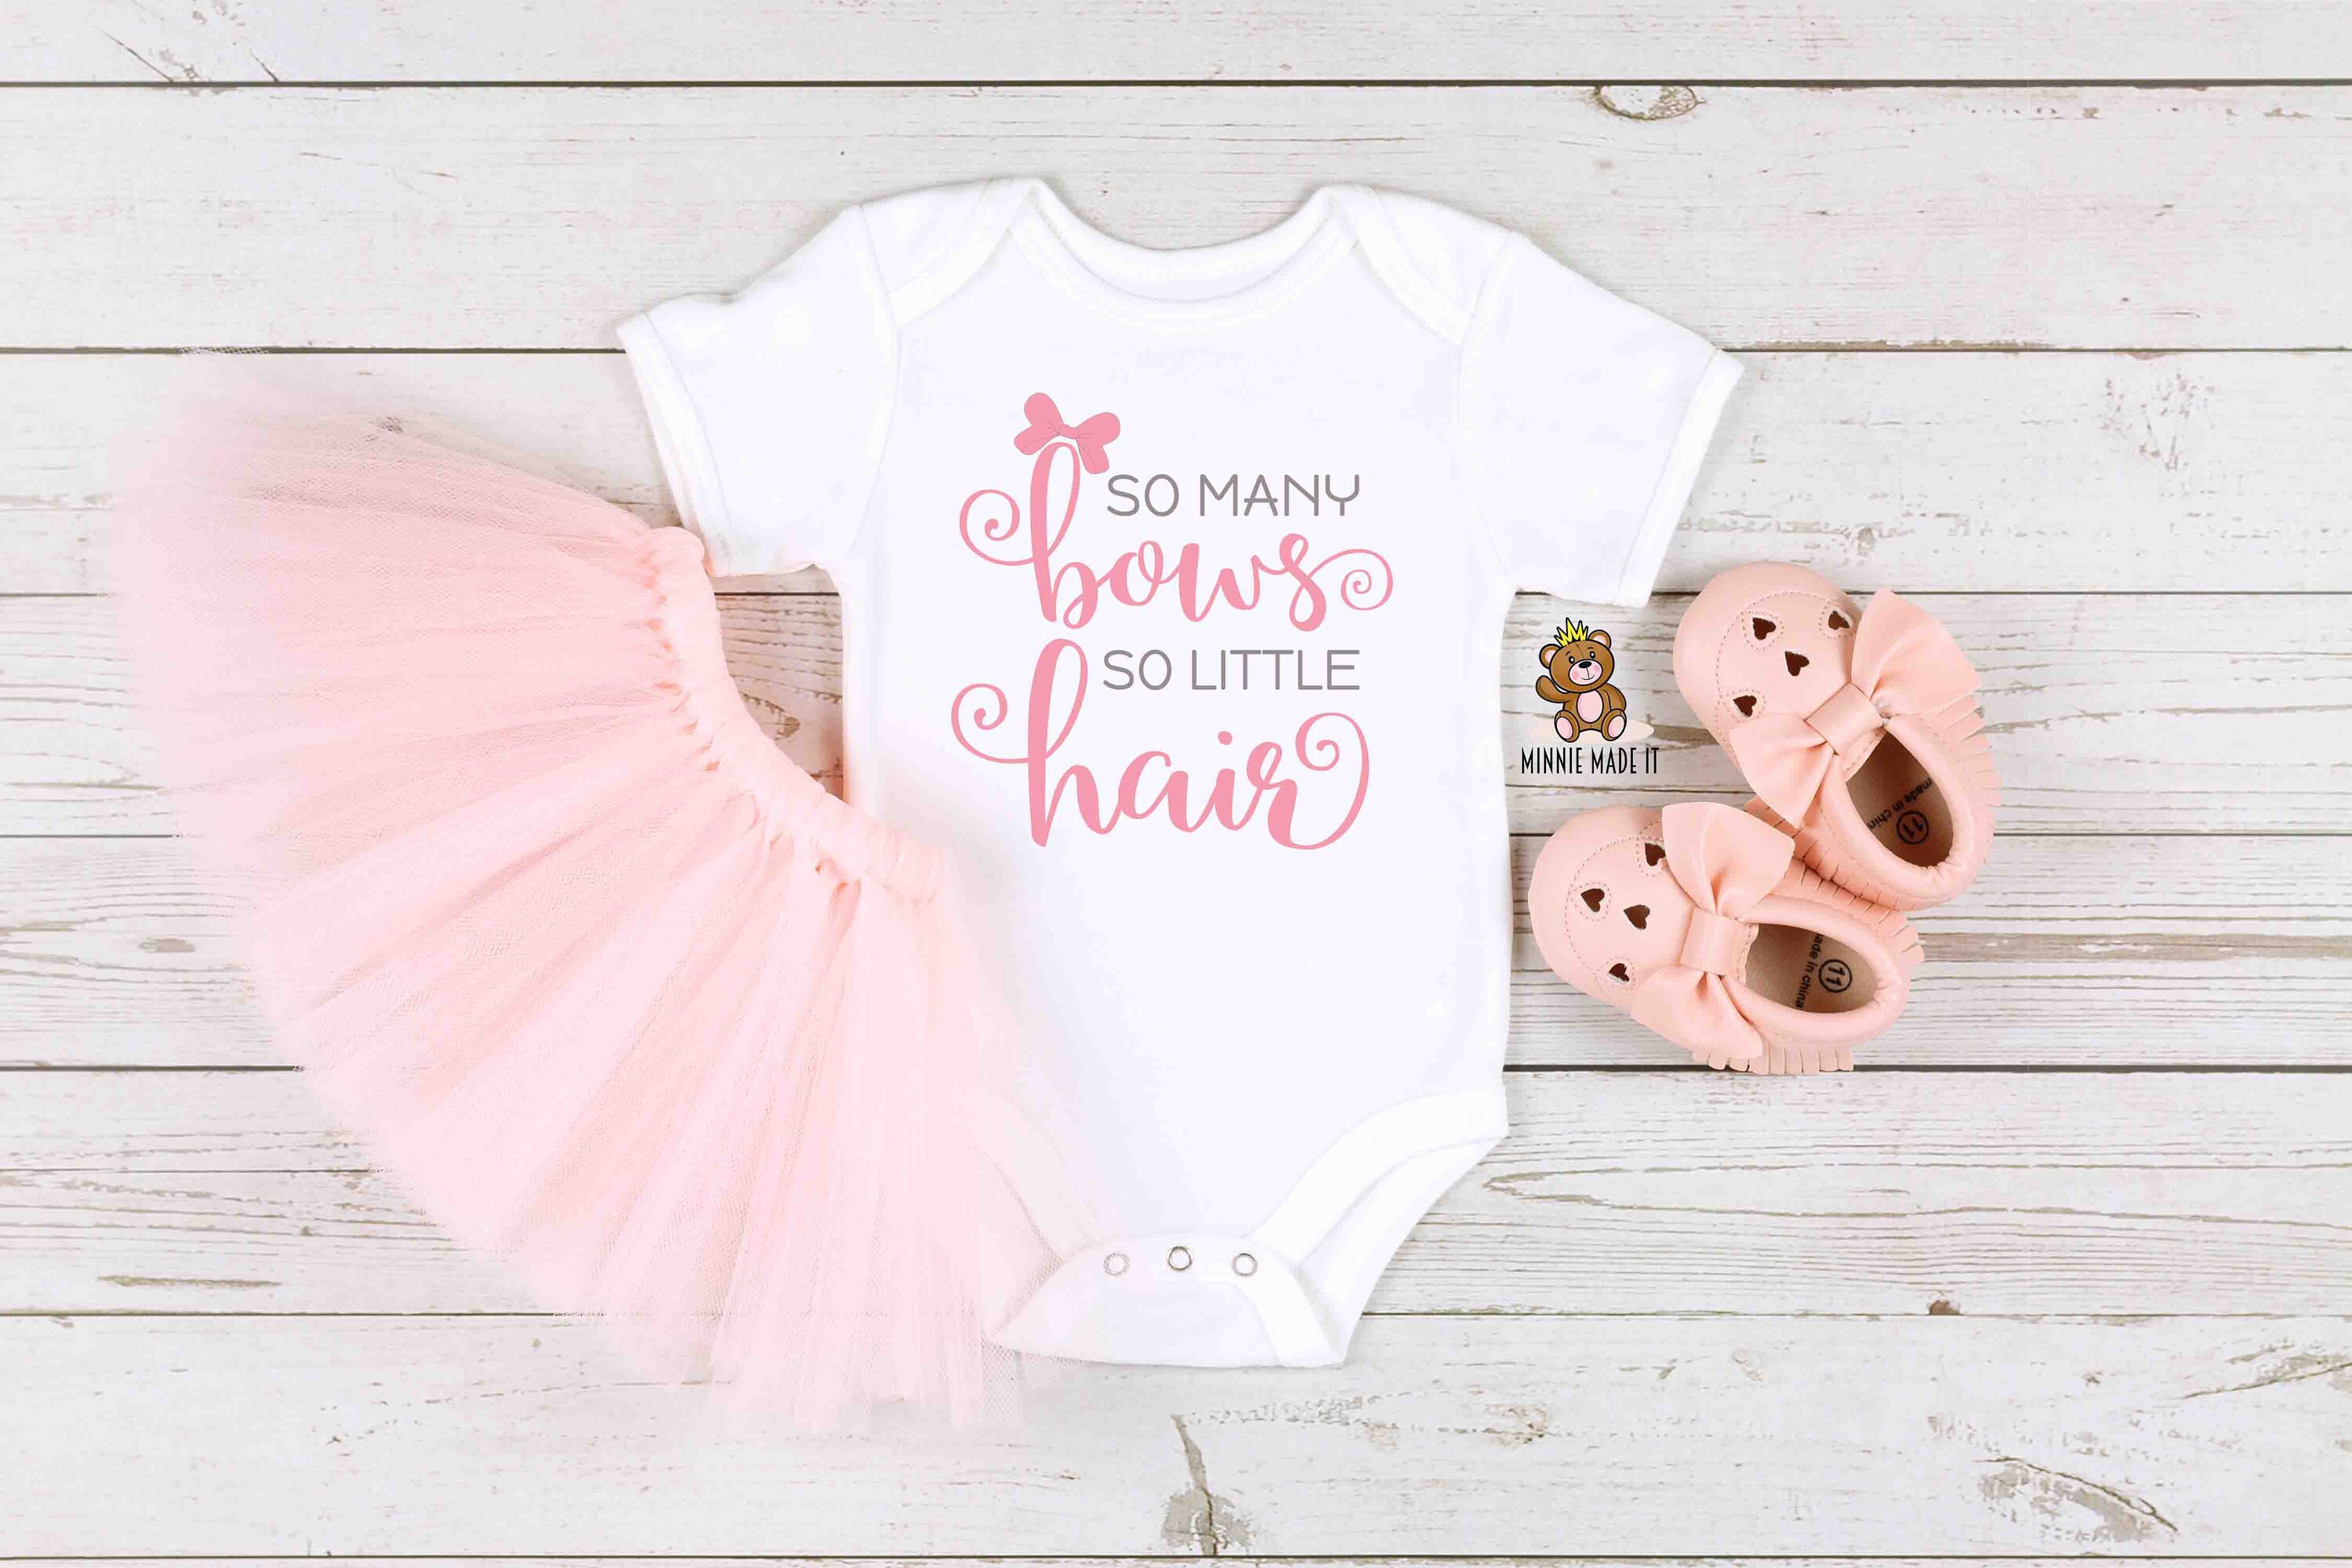 Funny Baby Girl Shirt Newborn Baby Girl Gift New Baby Girl Pink Outfit Cute  Hot Lucky 